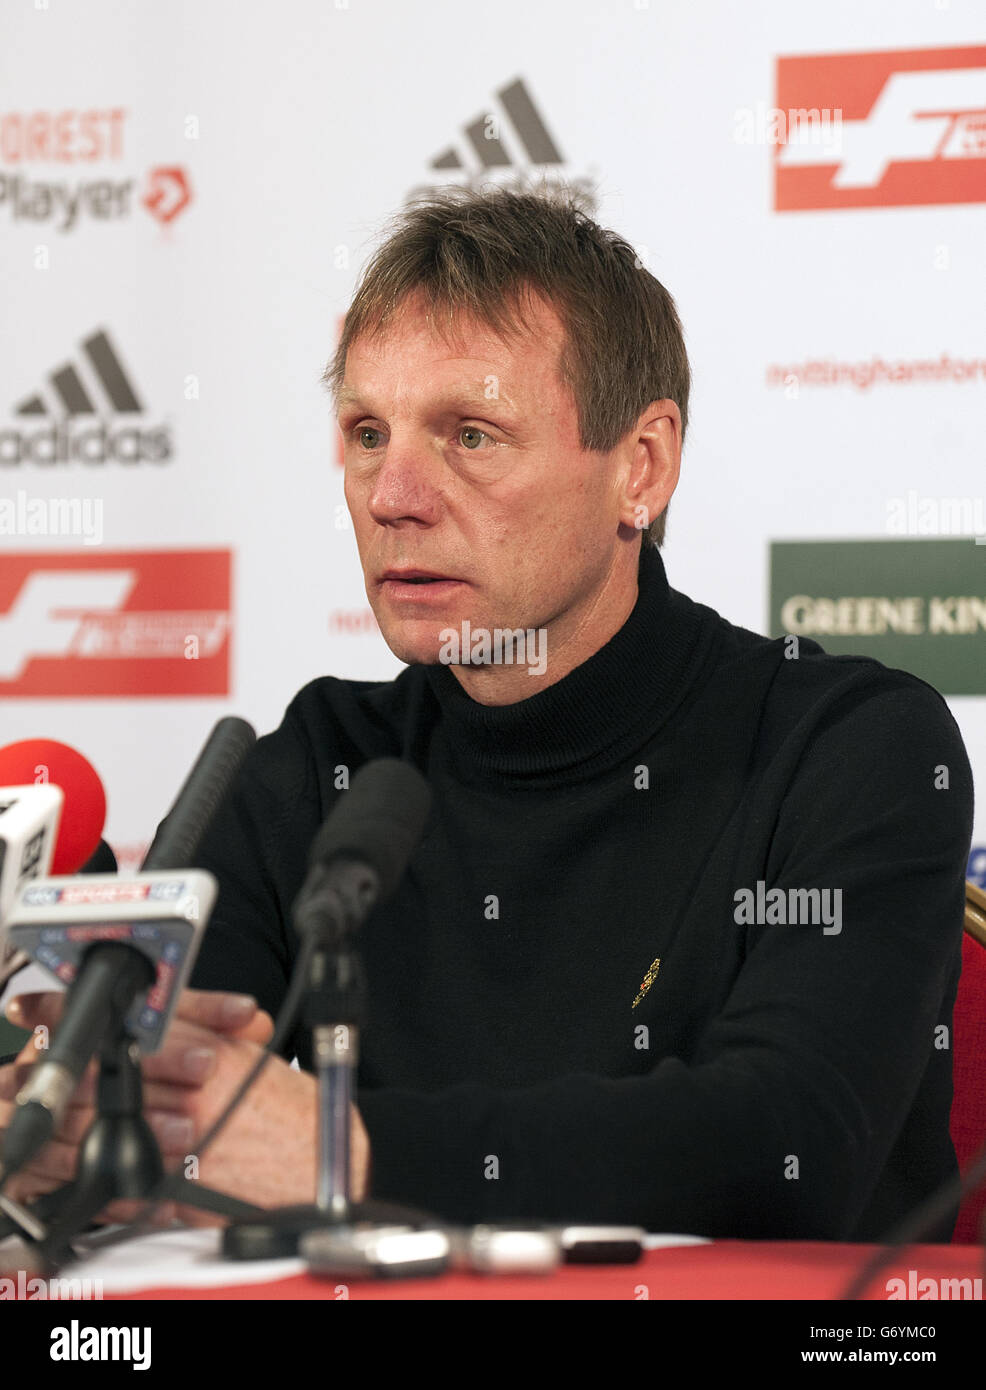 Stuart Pearce during a press conference where he was confirmed as Nottingham Forest manager starting on July 1st Stock Photo